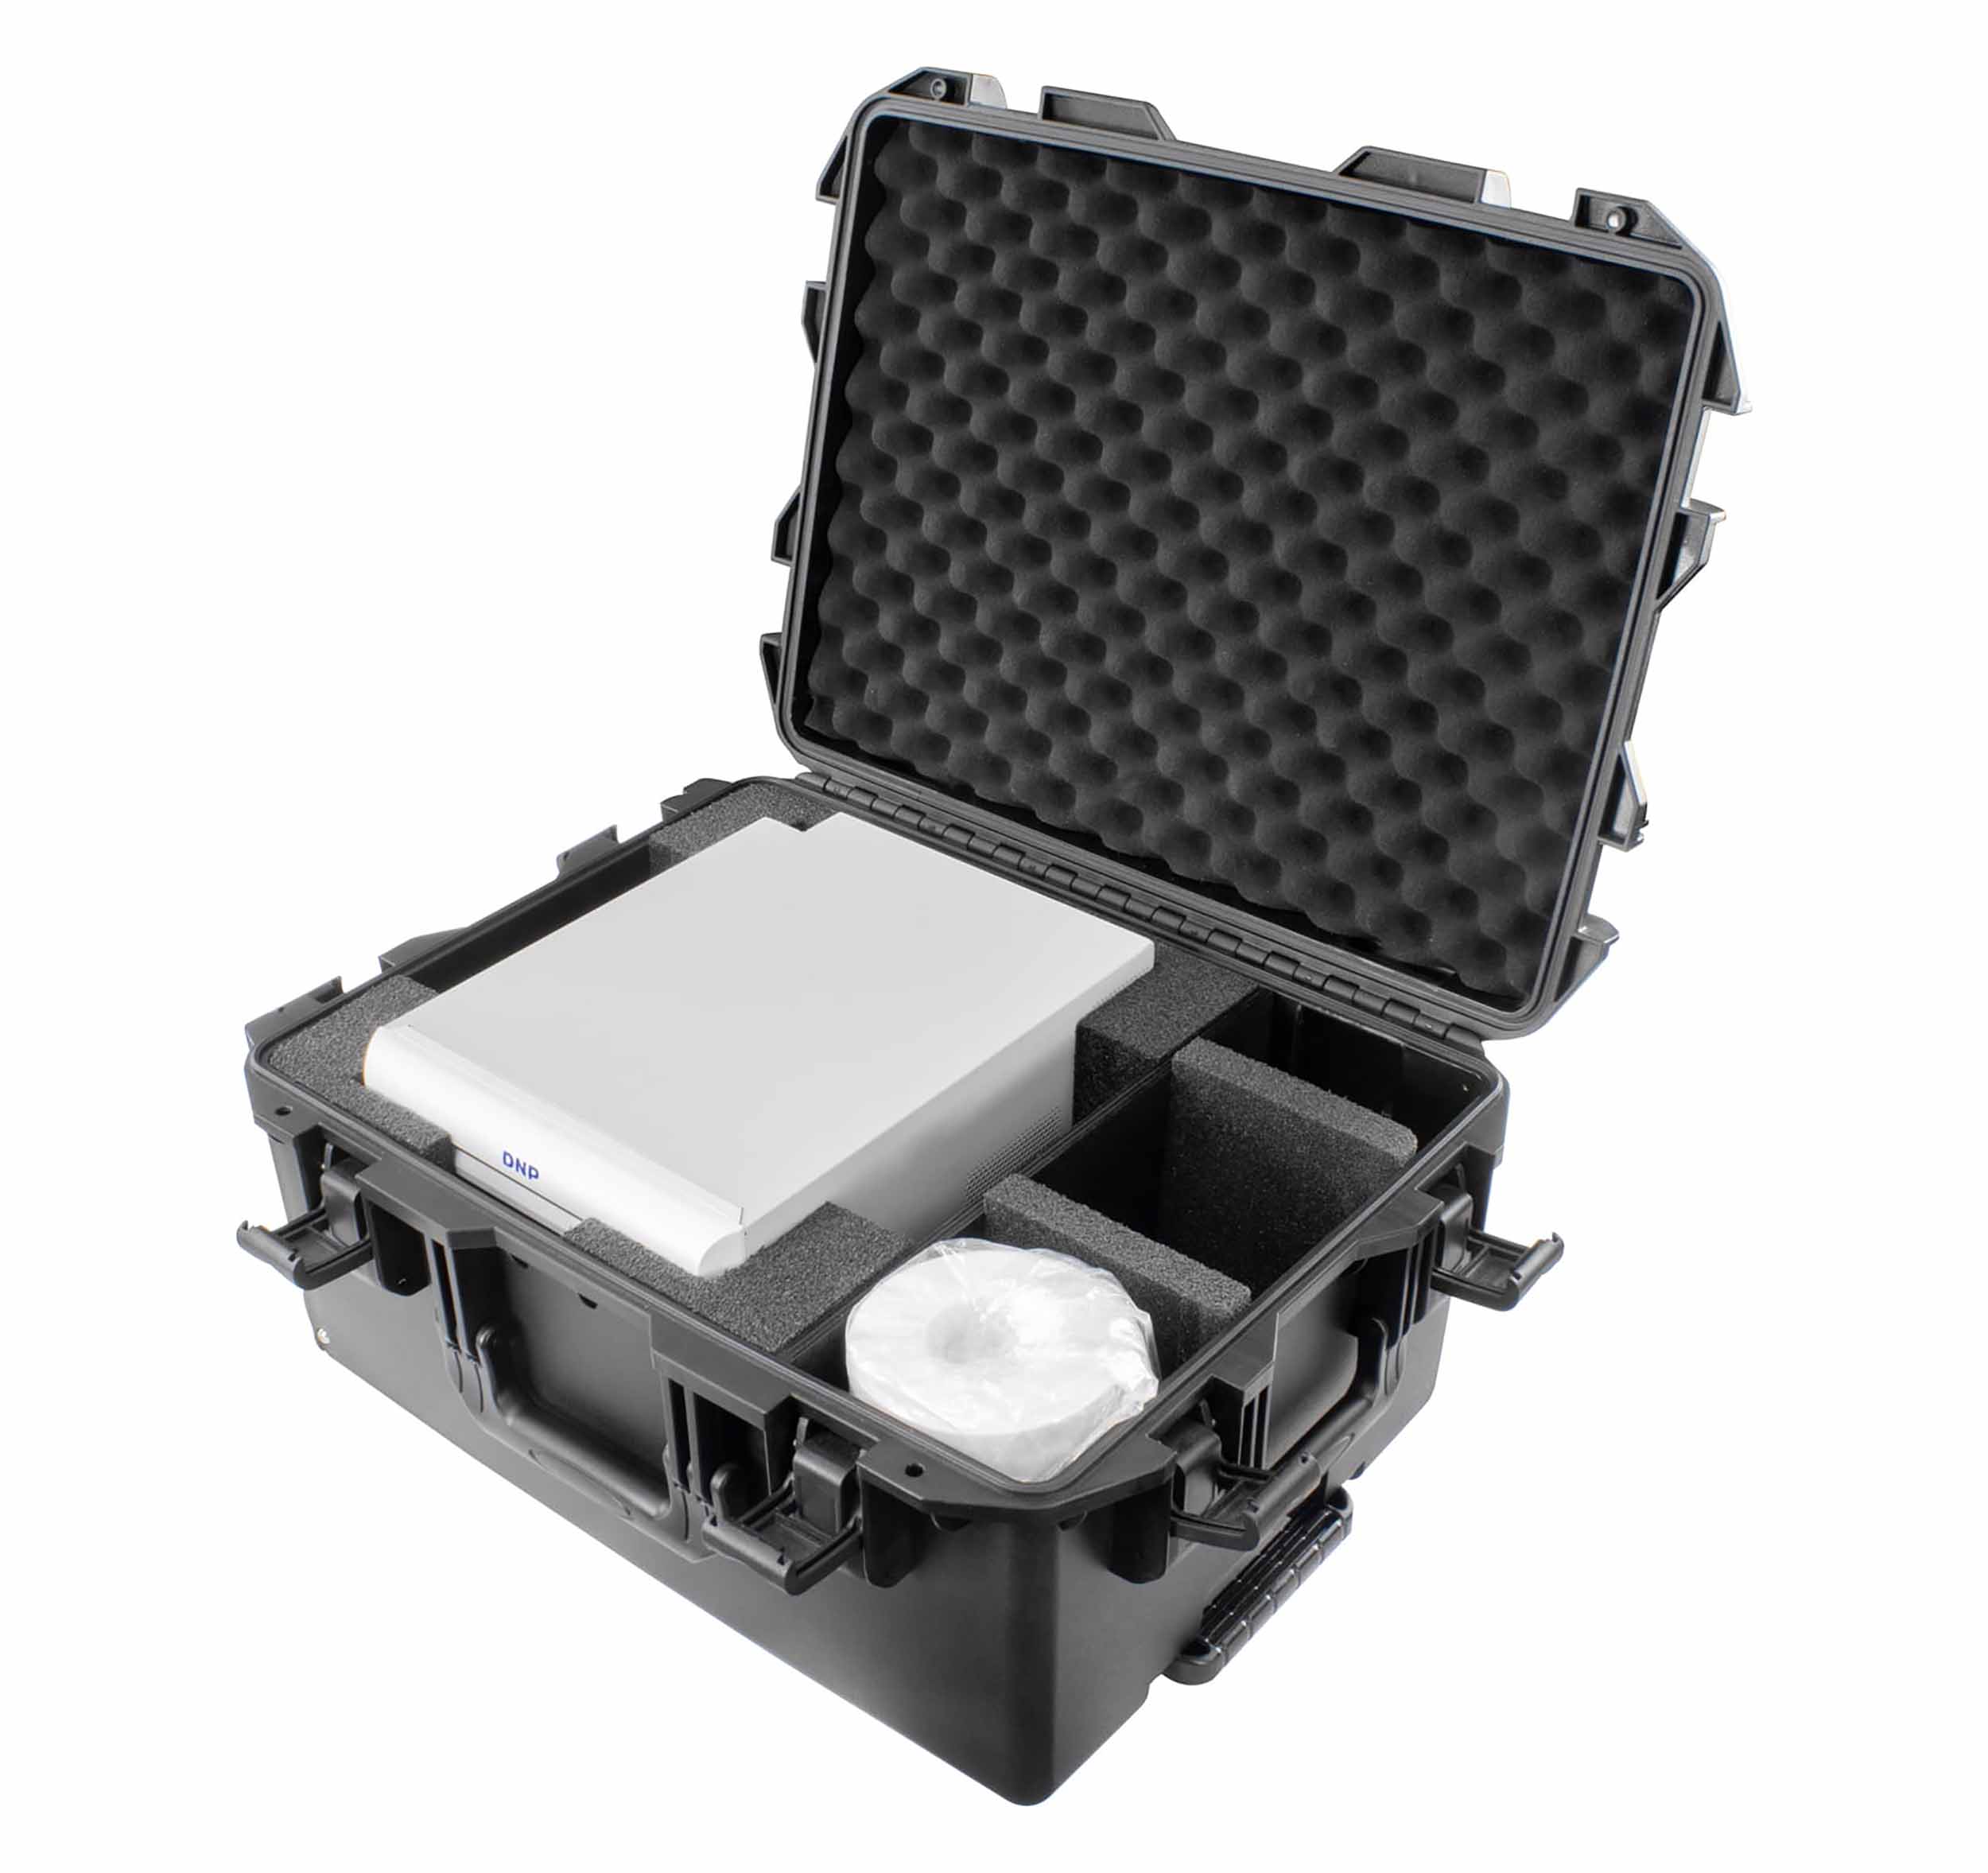 Odyssey Deluxe DNP Dustproof and Watertight Trolley Case for DS620 Printer and Accessories by Odyssey